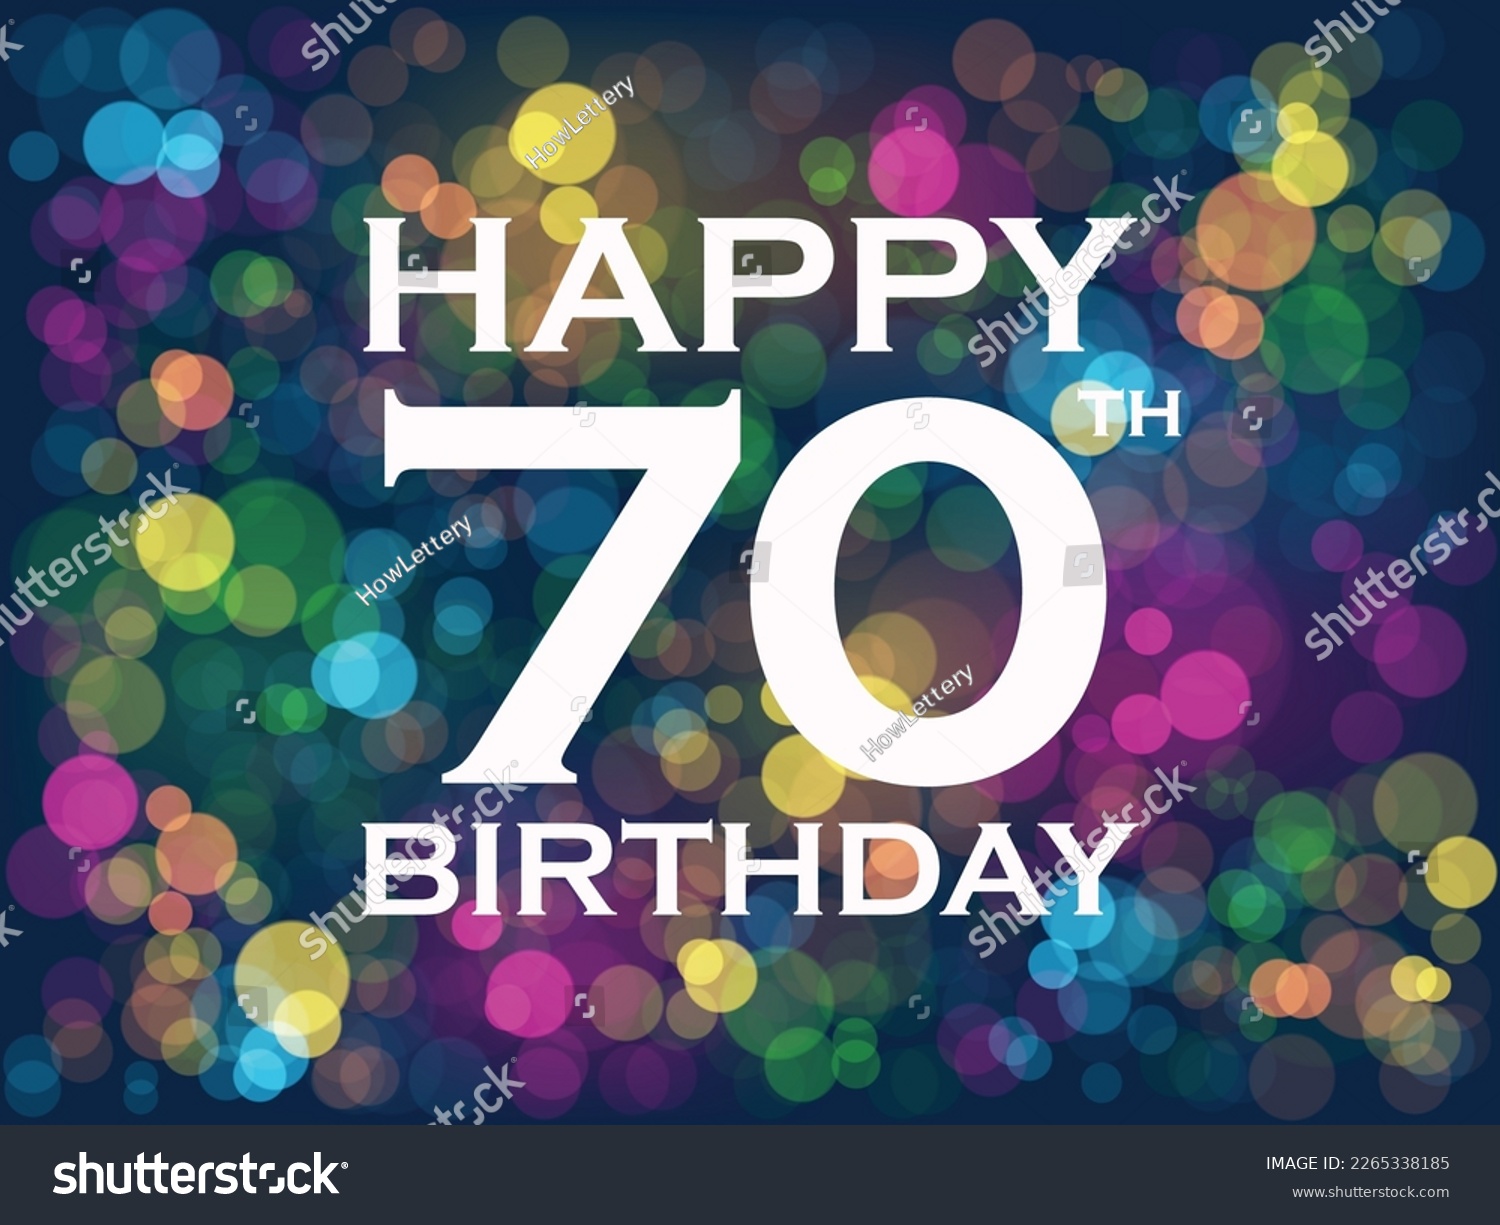 SVG of HAPPY 70th BIRTHDAY! banner with colorful bokeh svg